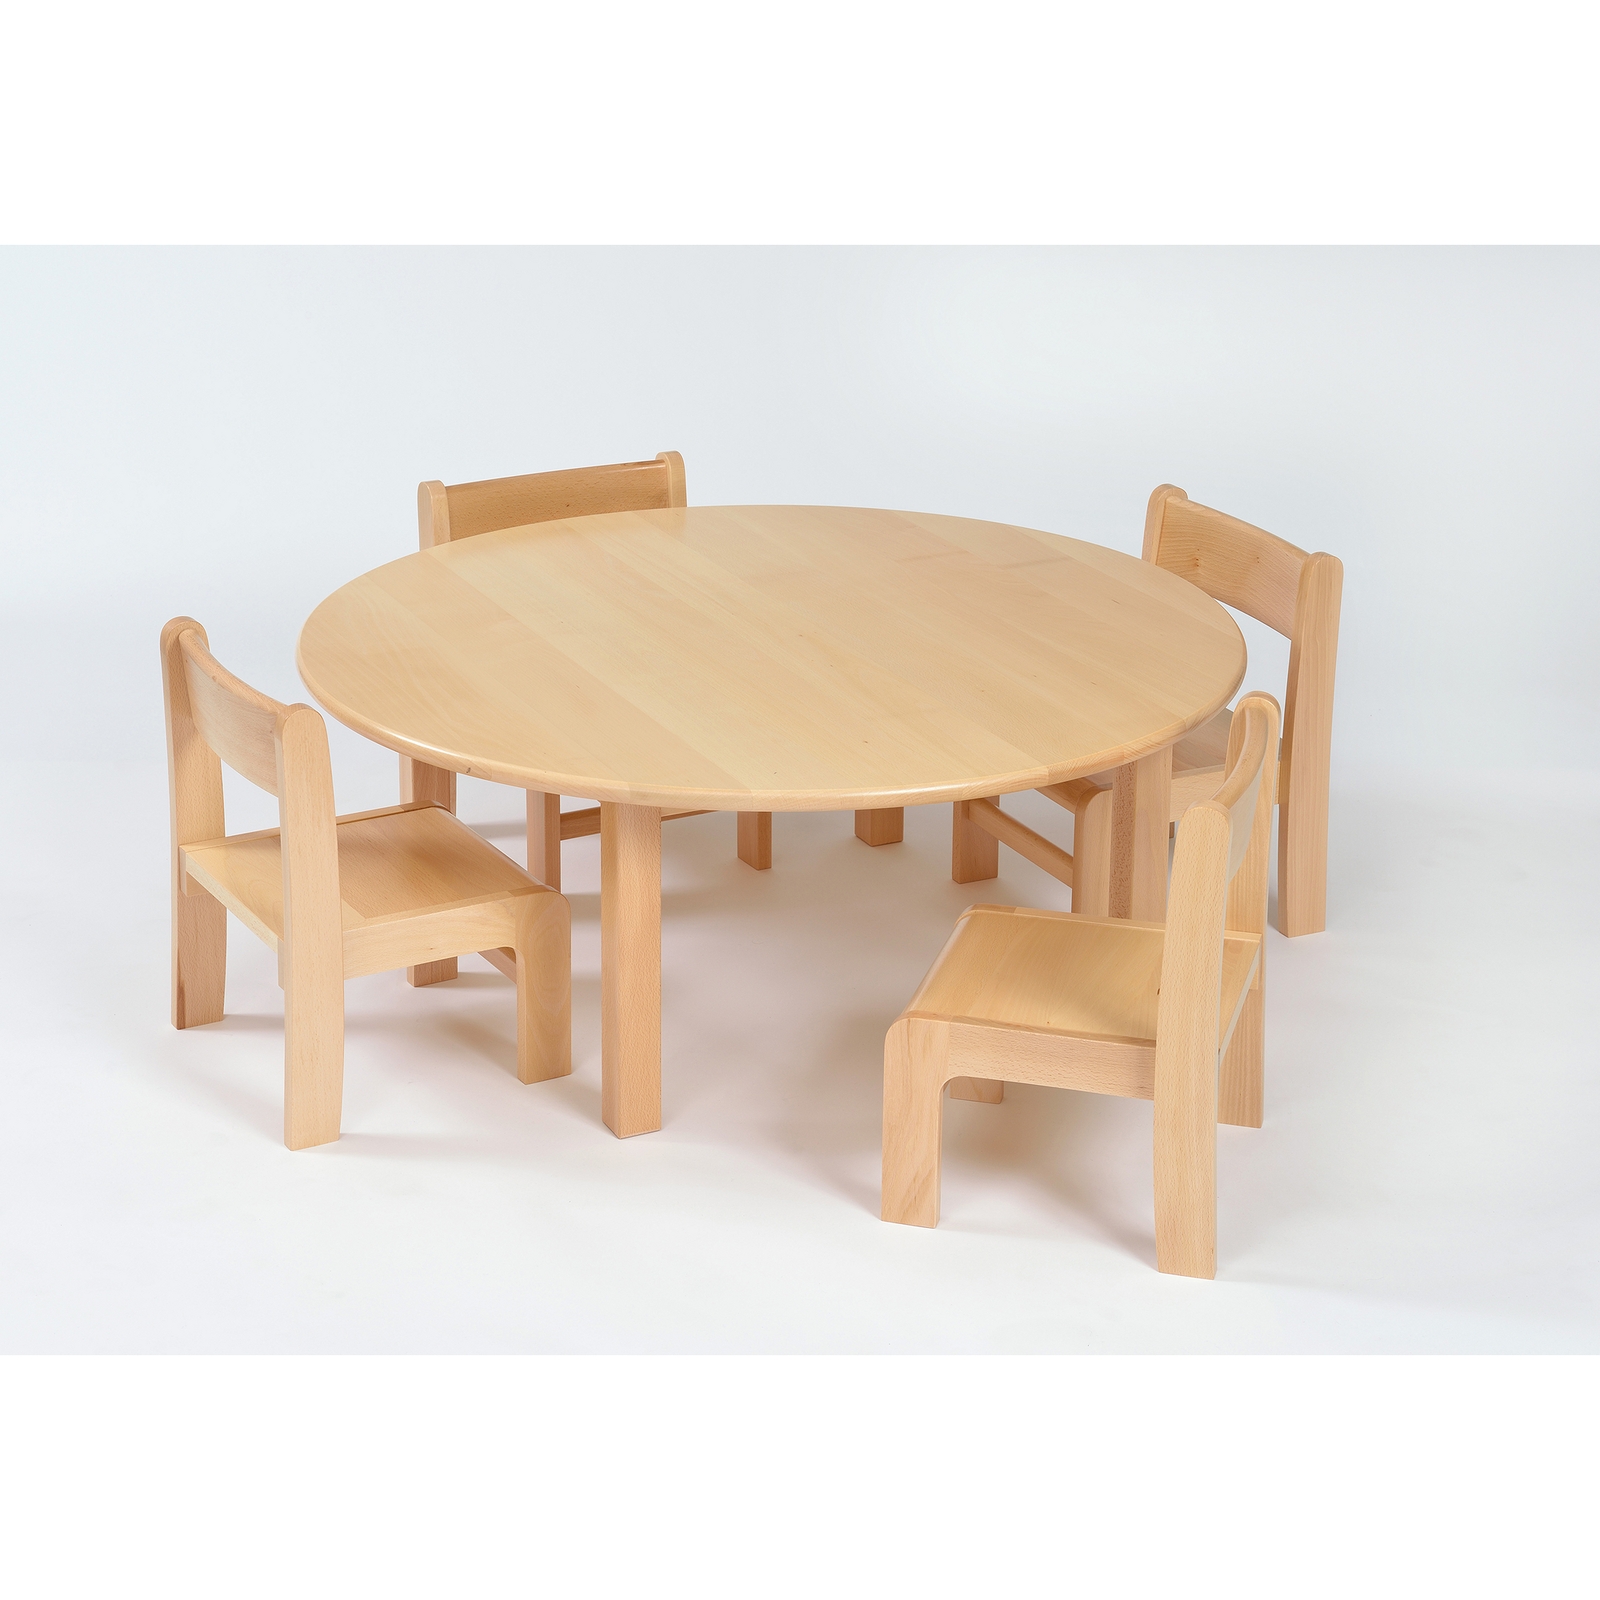 Galt Circ Table 4 Chairs - 2-3 Yr Olds